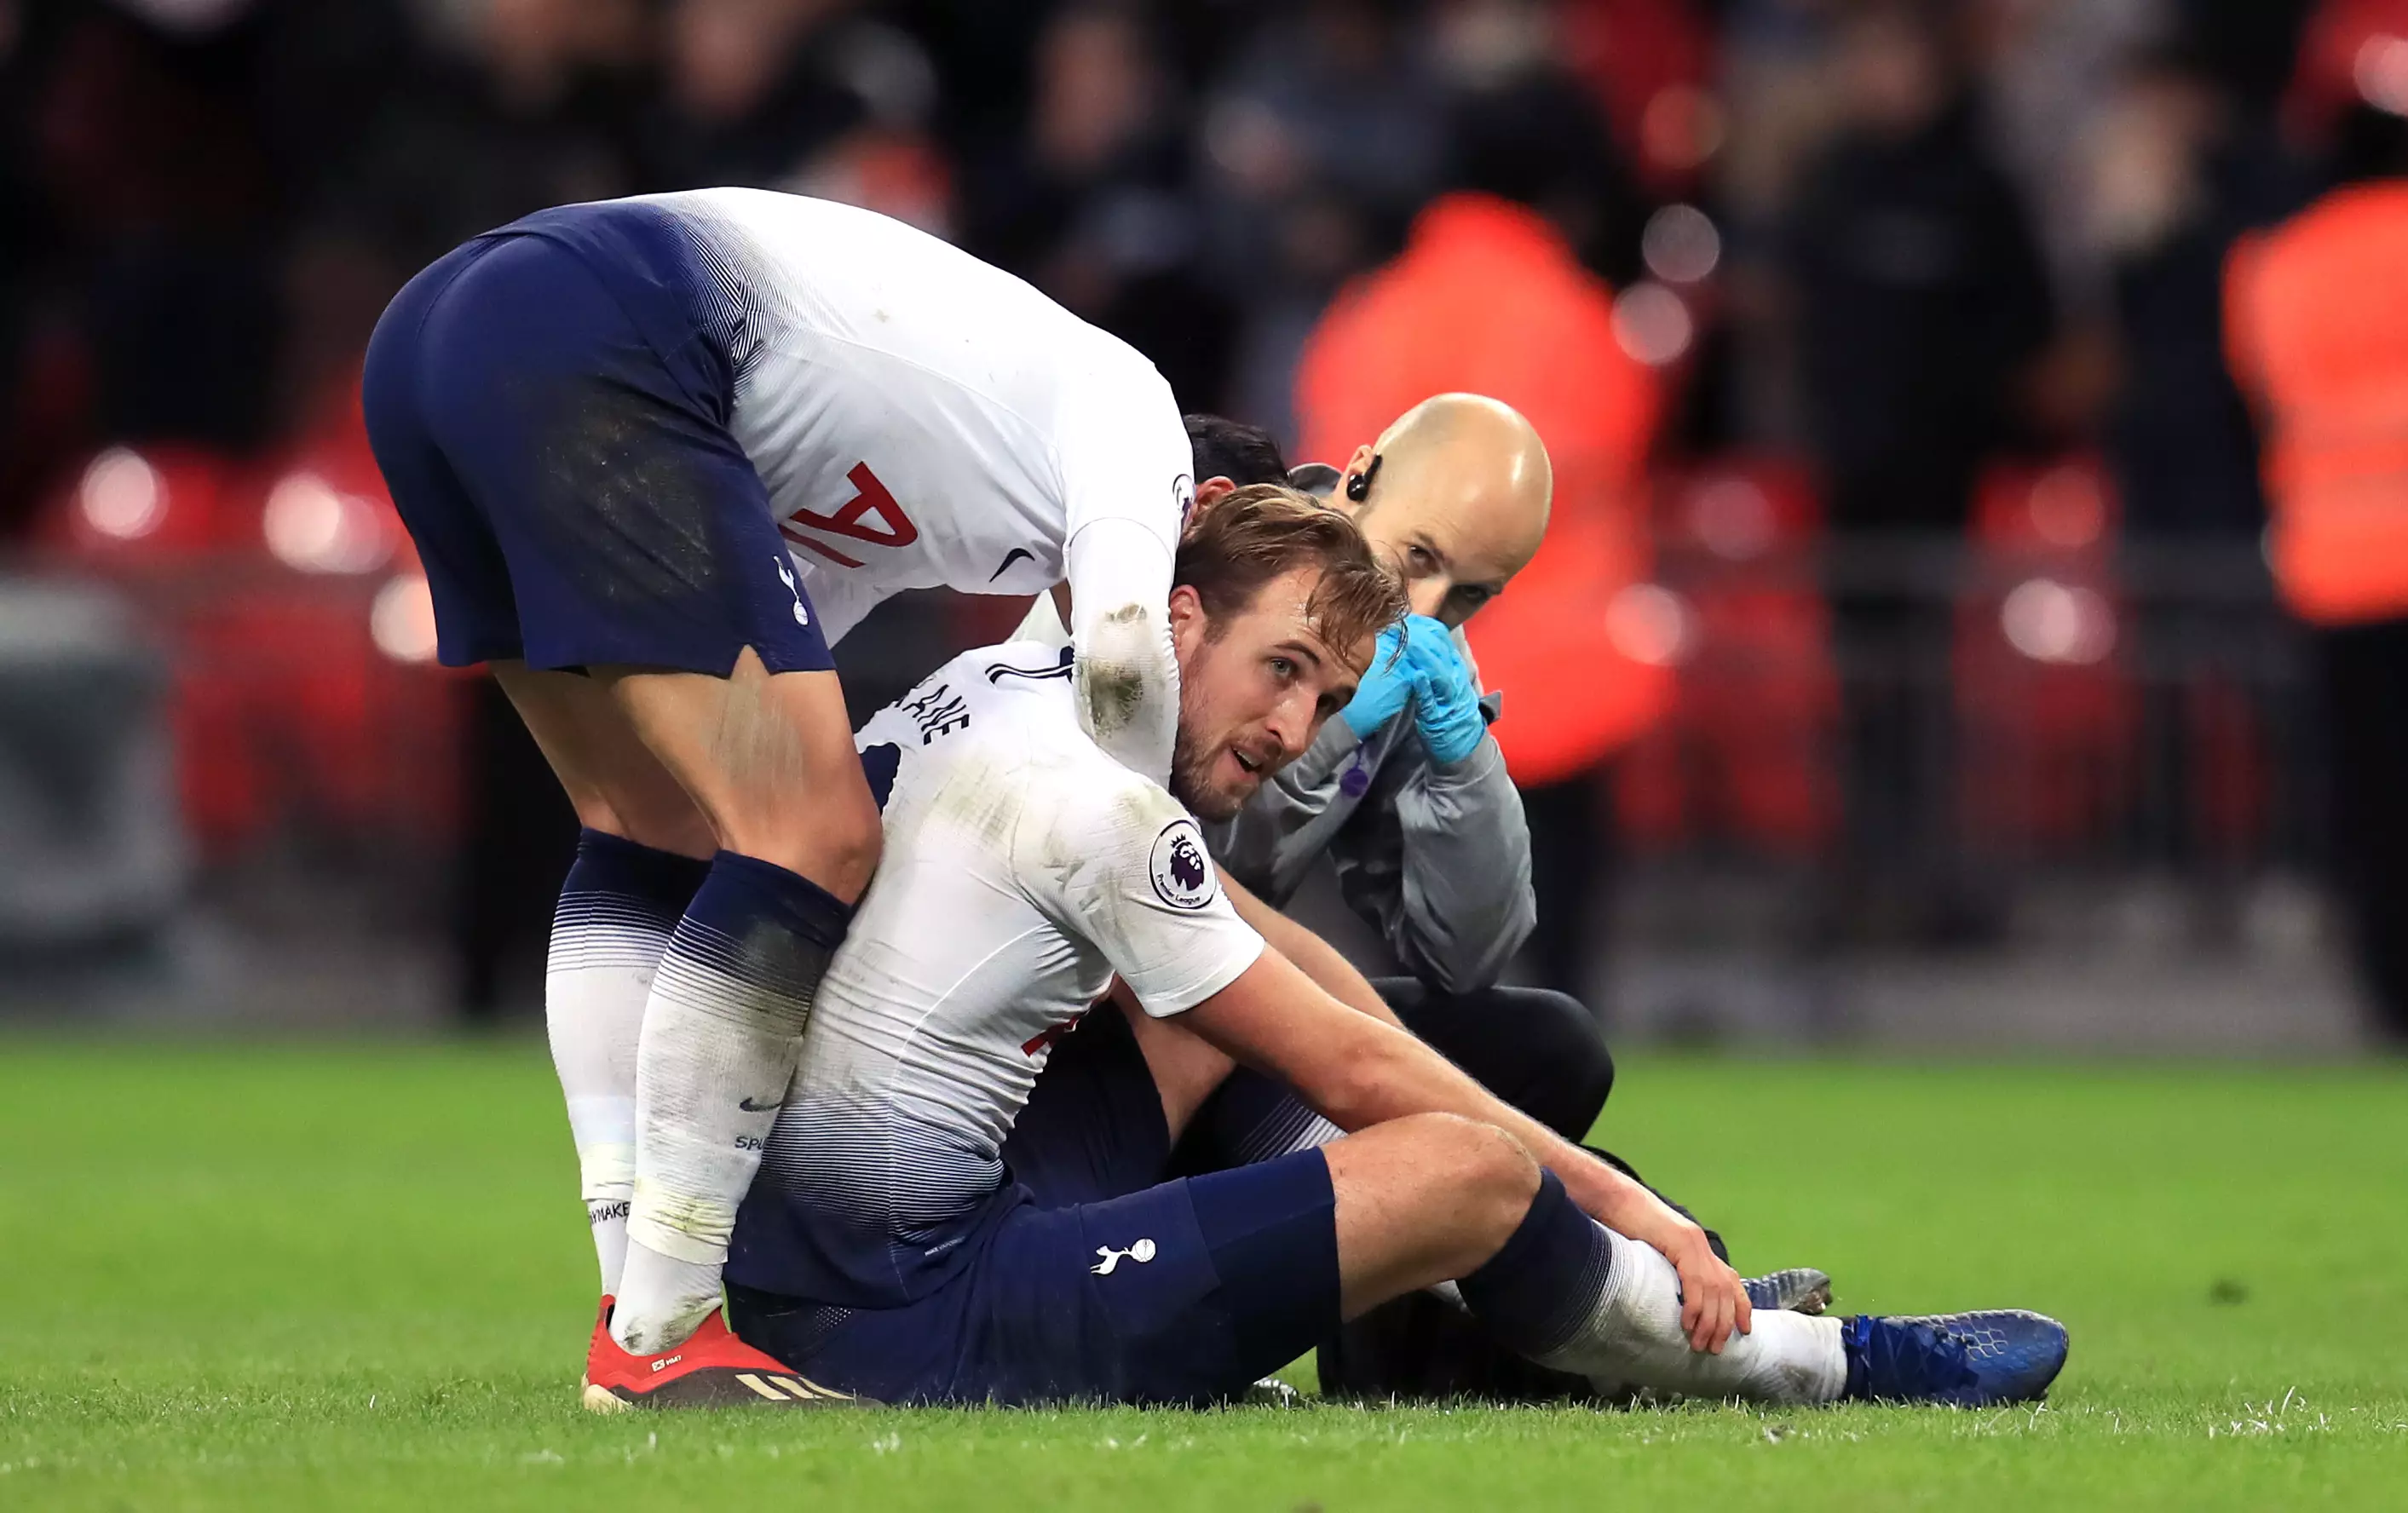 Kane was injured in the recent 1-0 loss to Manchester United. Image: PA Images